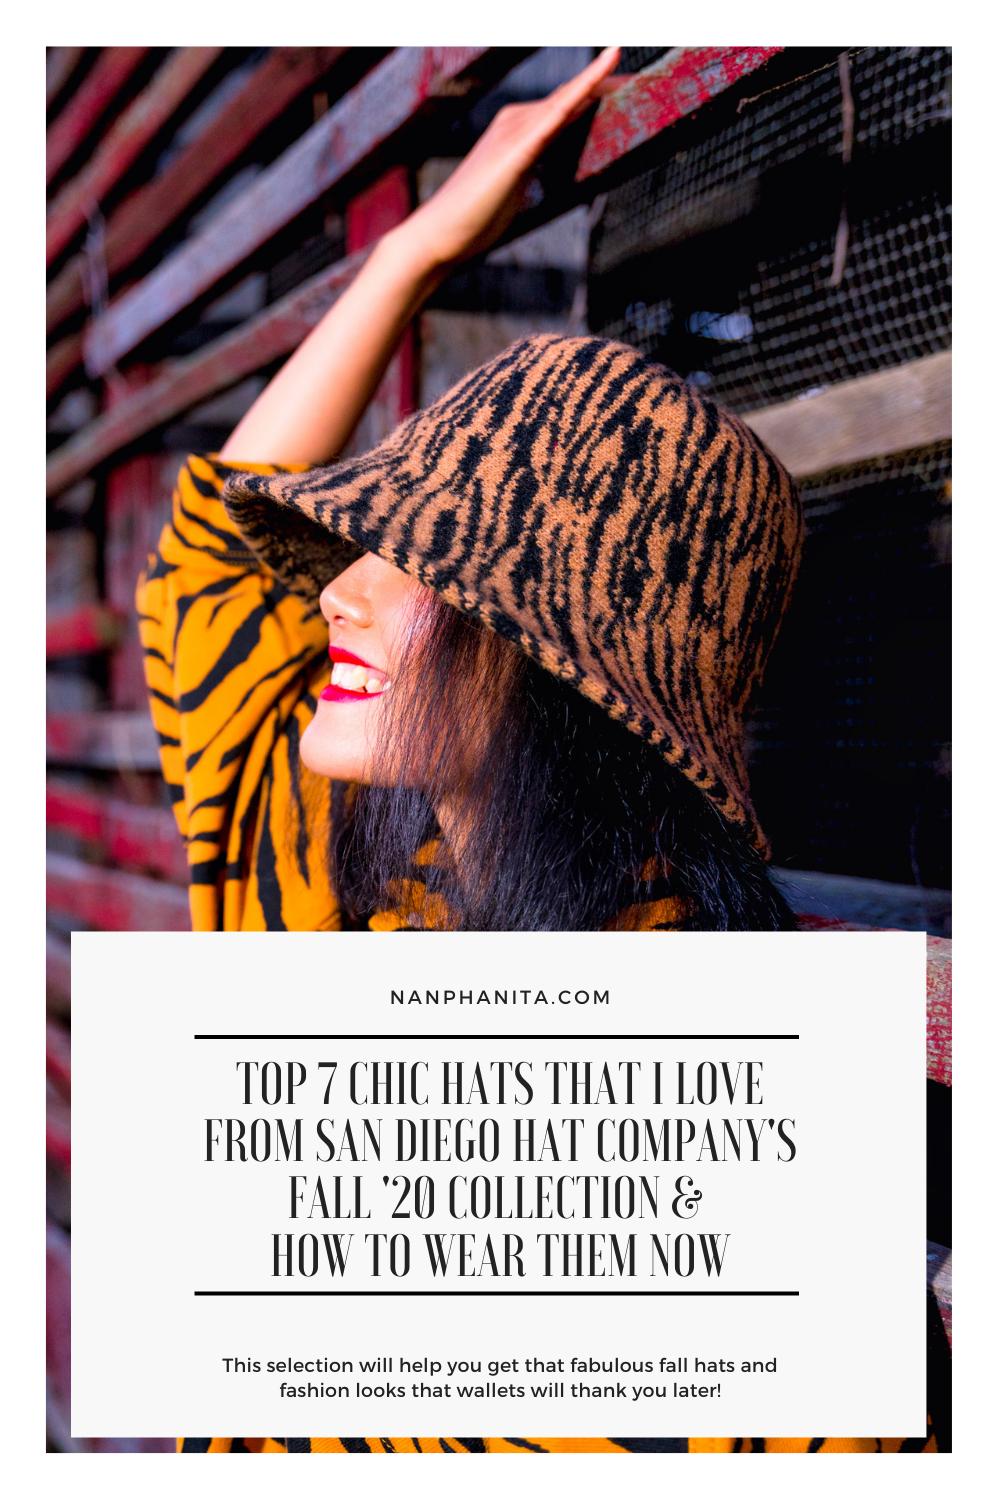 top 7 chic hats that i love from san diego hat company fall 2020 collection and how to wear them now